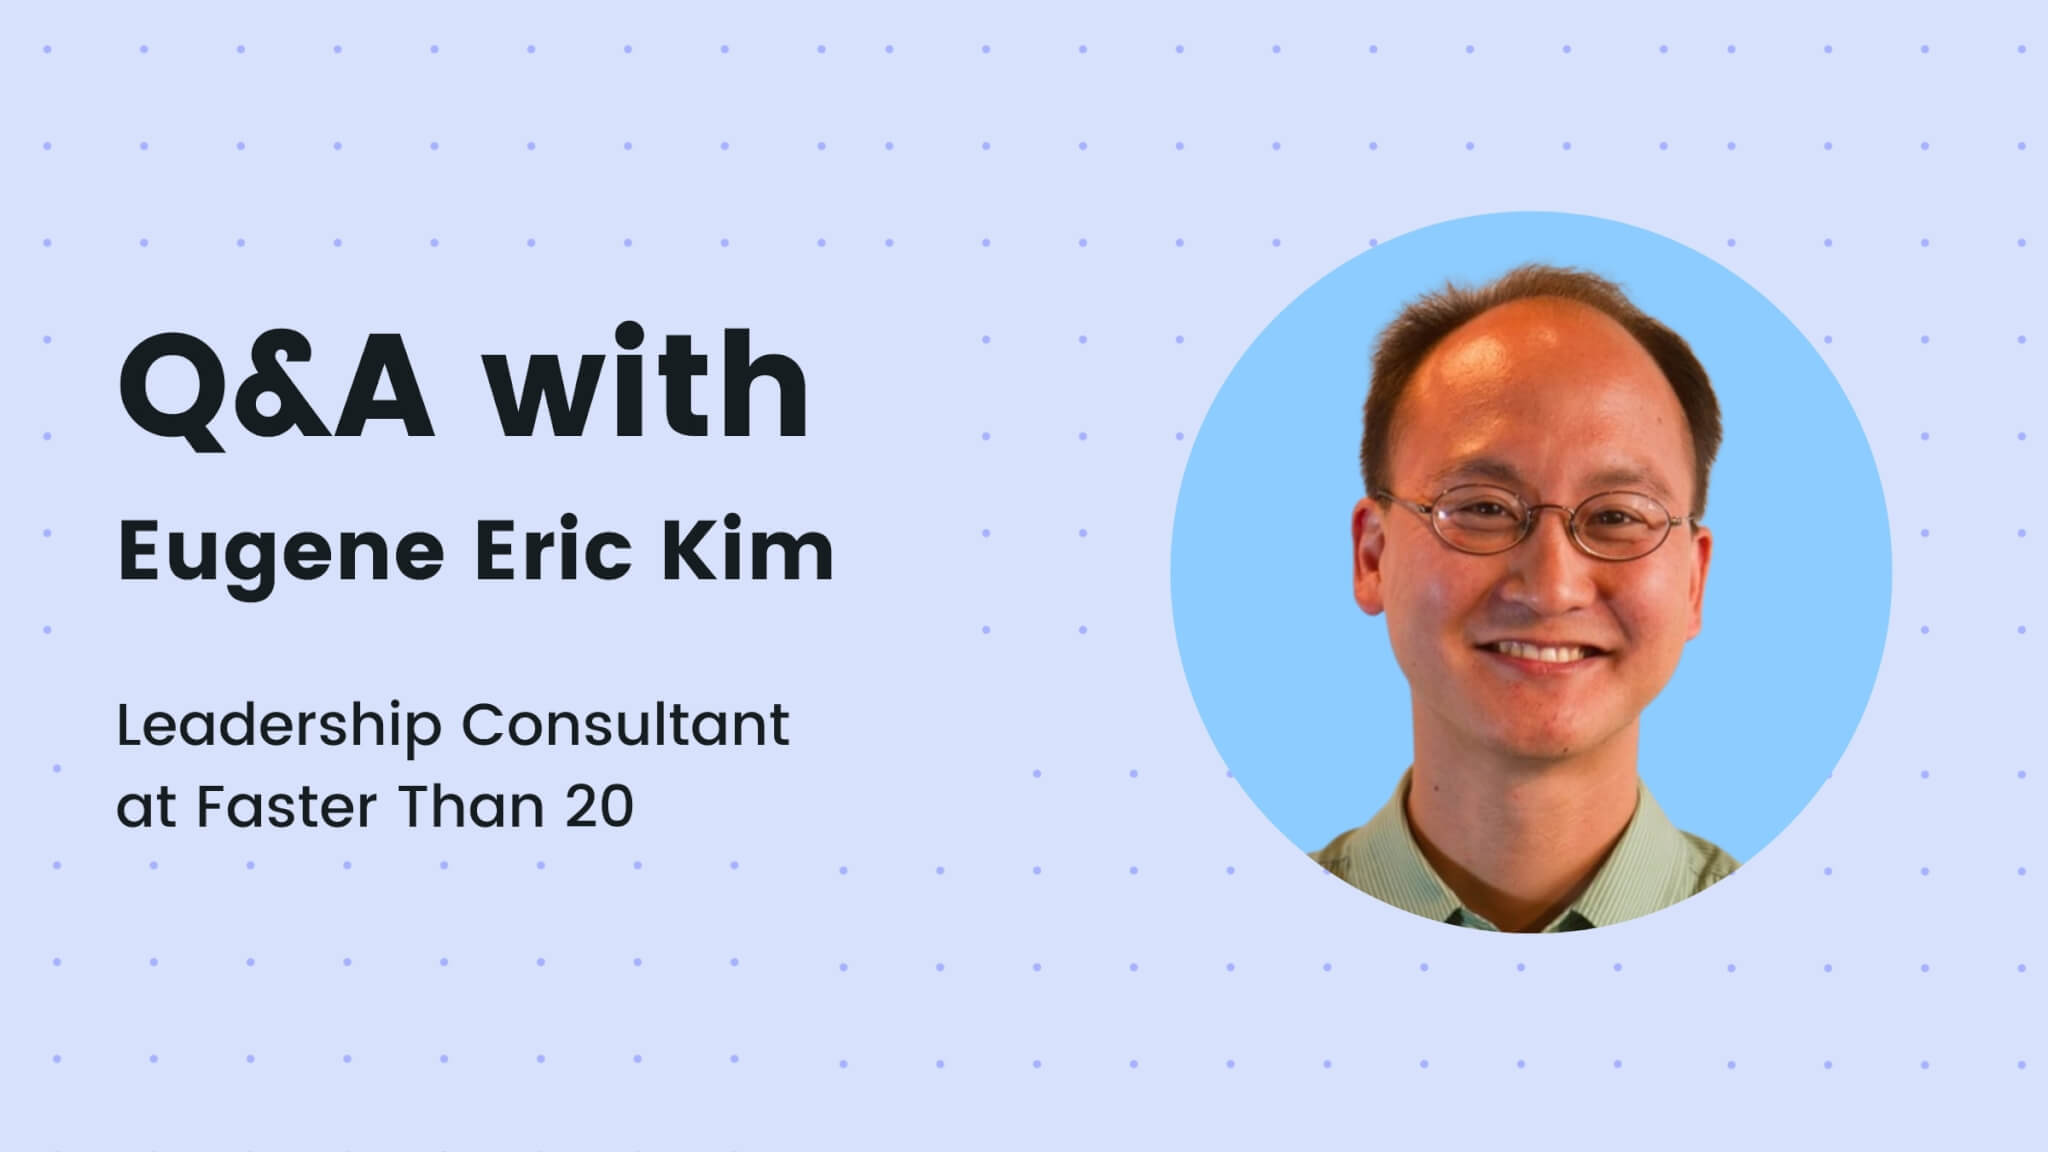 Eugene Eric Kim: Setting Specific Goals and Training Your Listening Muscles